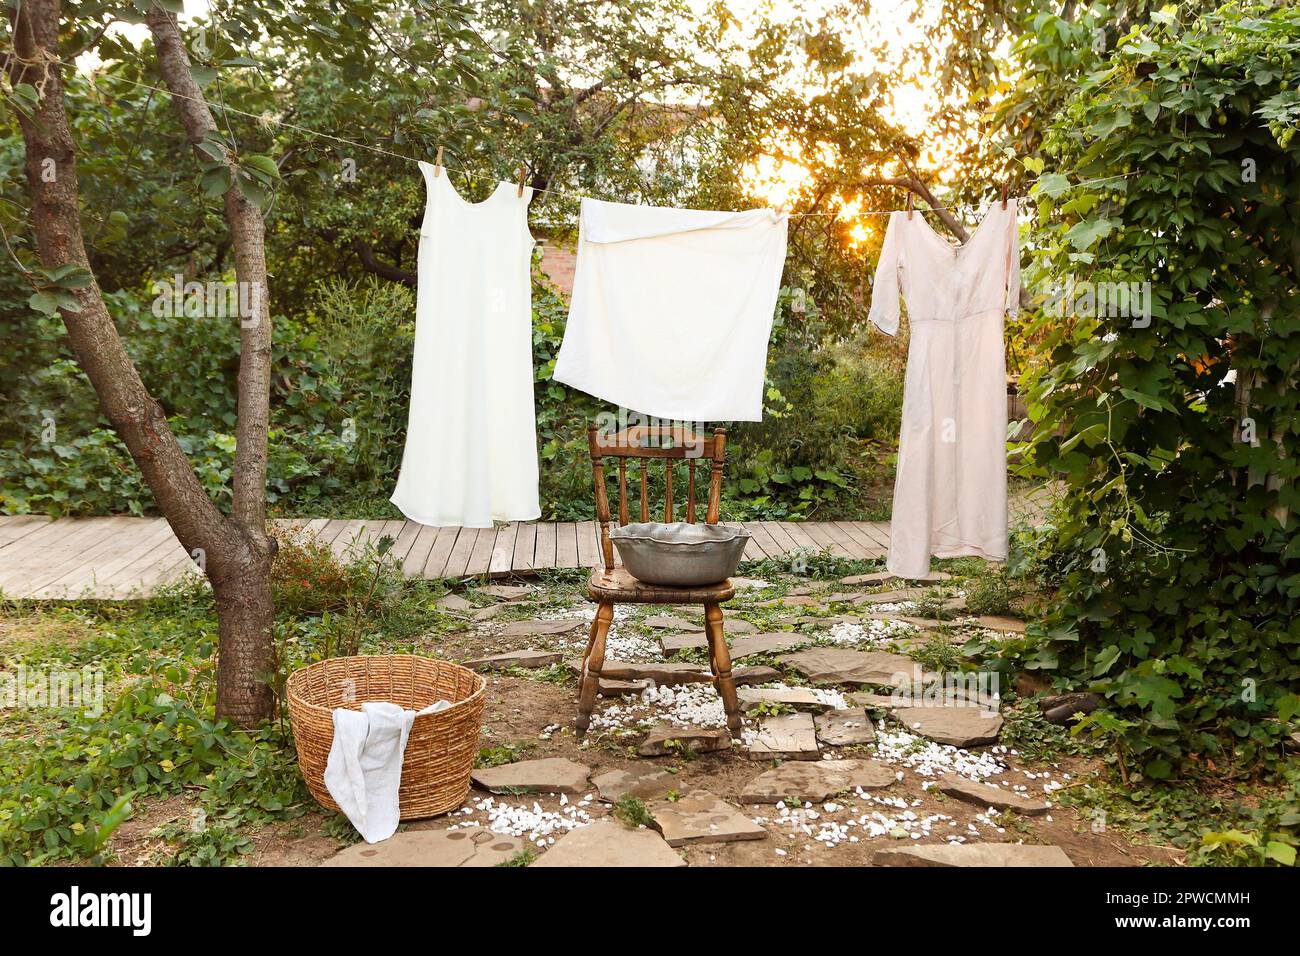 Clean wet garments hanging on rope and drying near retro chair and bowl on laundry day in garden Stock Photo